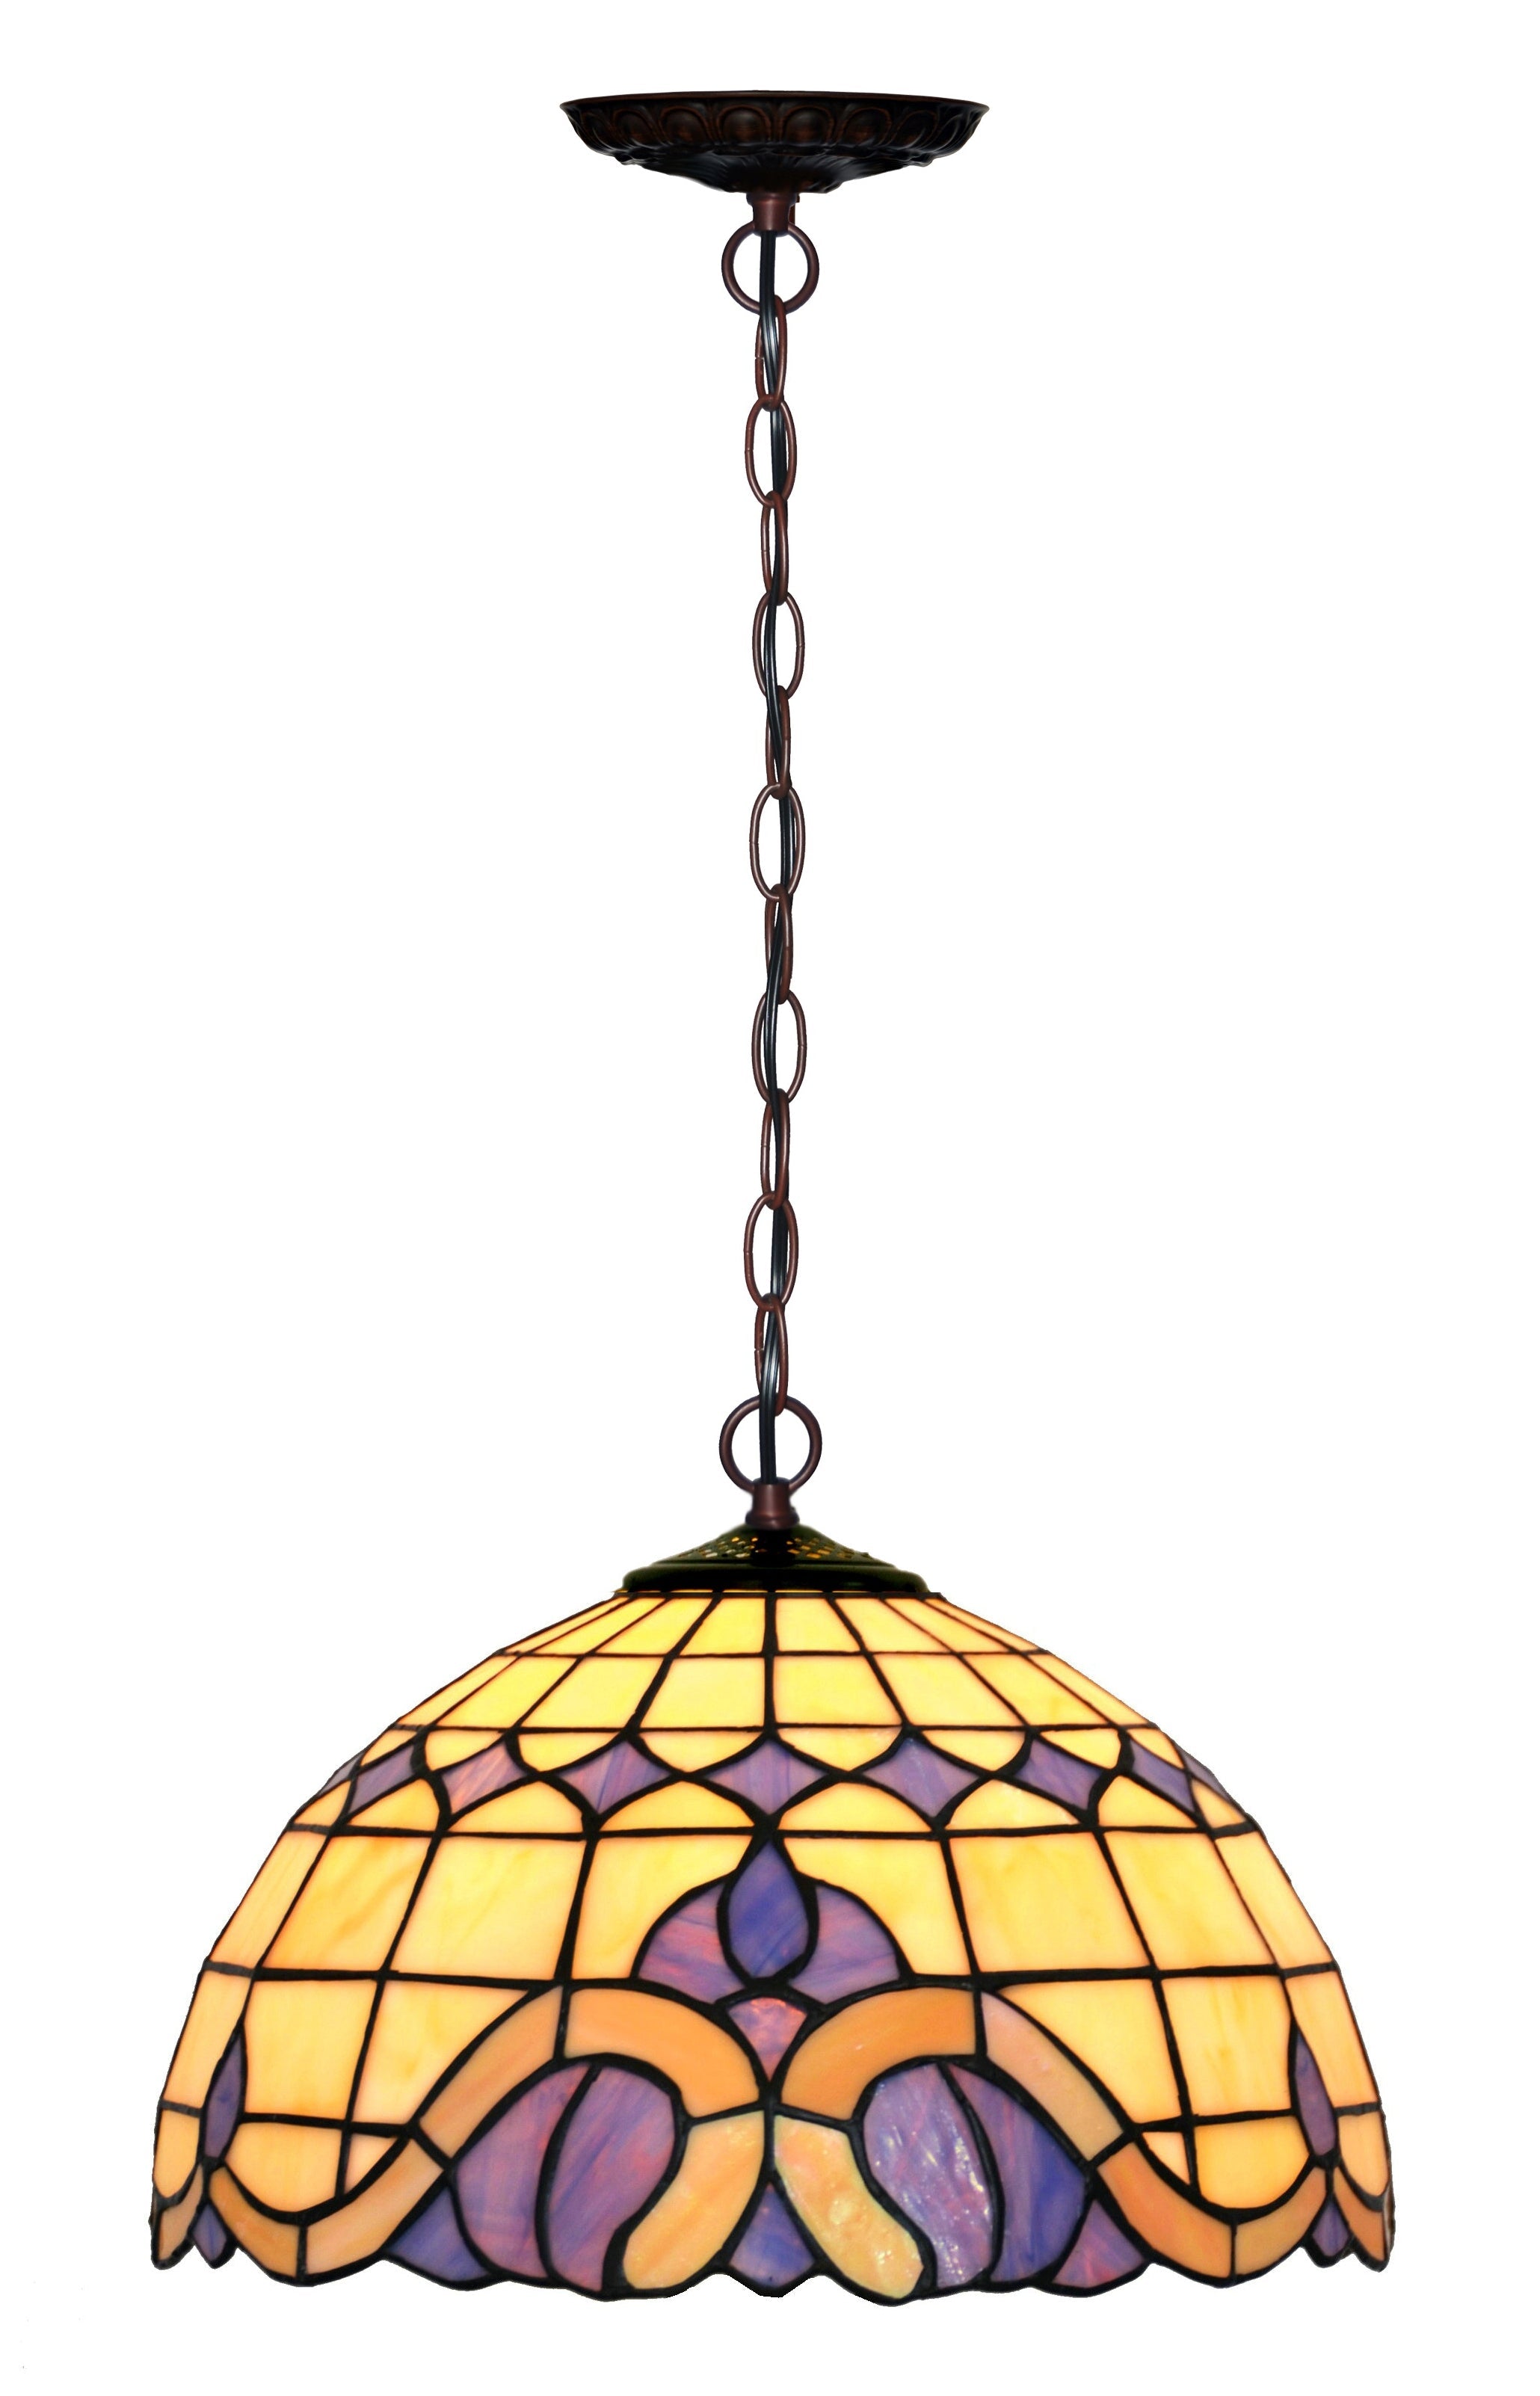 12" Baroque Style Stained Glass  Cafe Tiffany Hanging Light